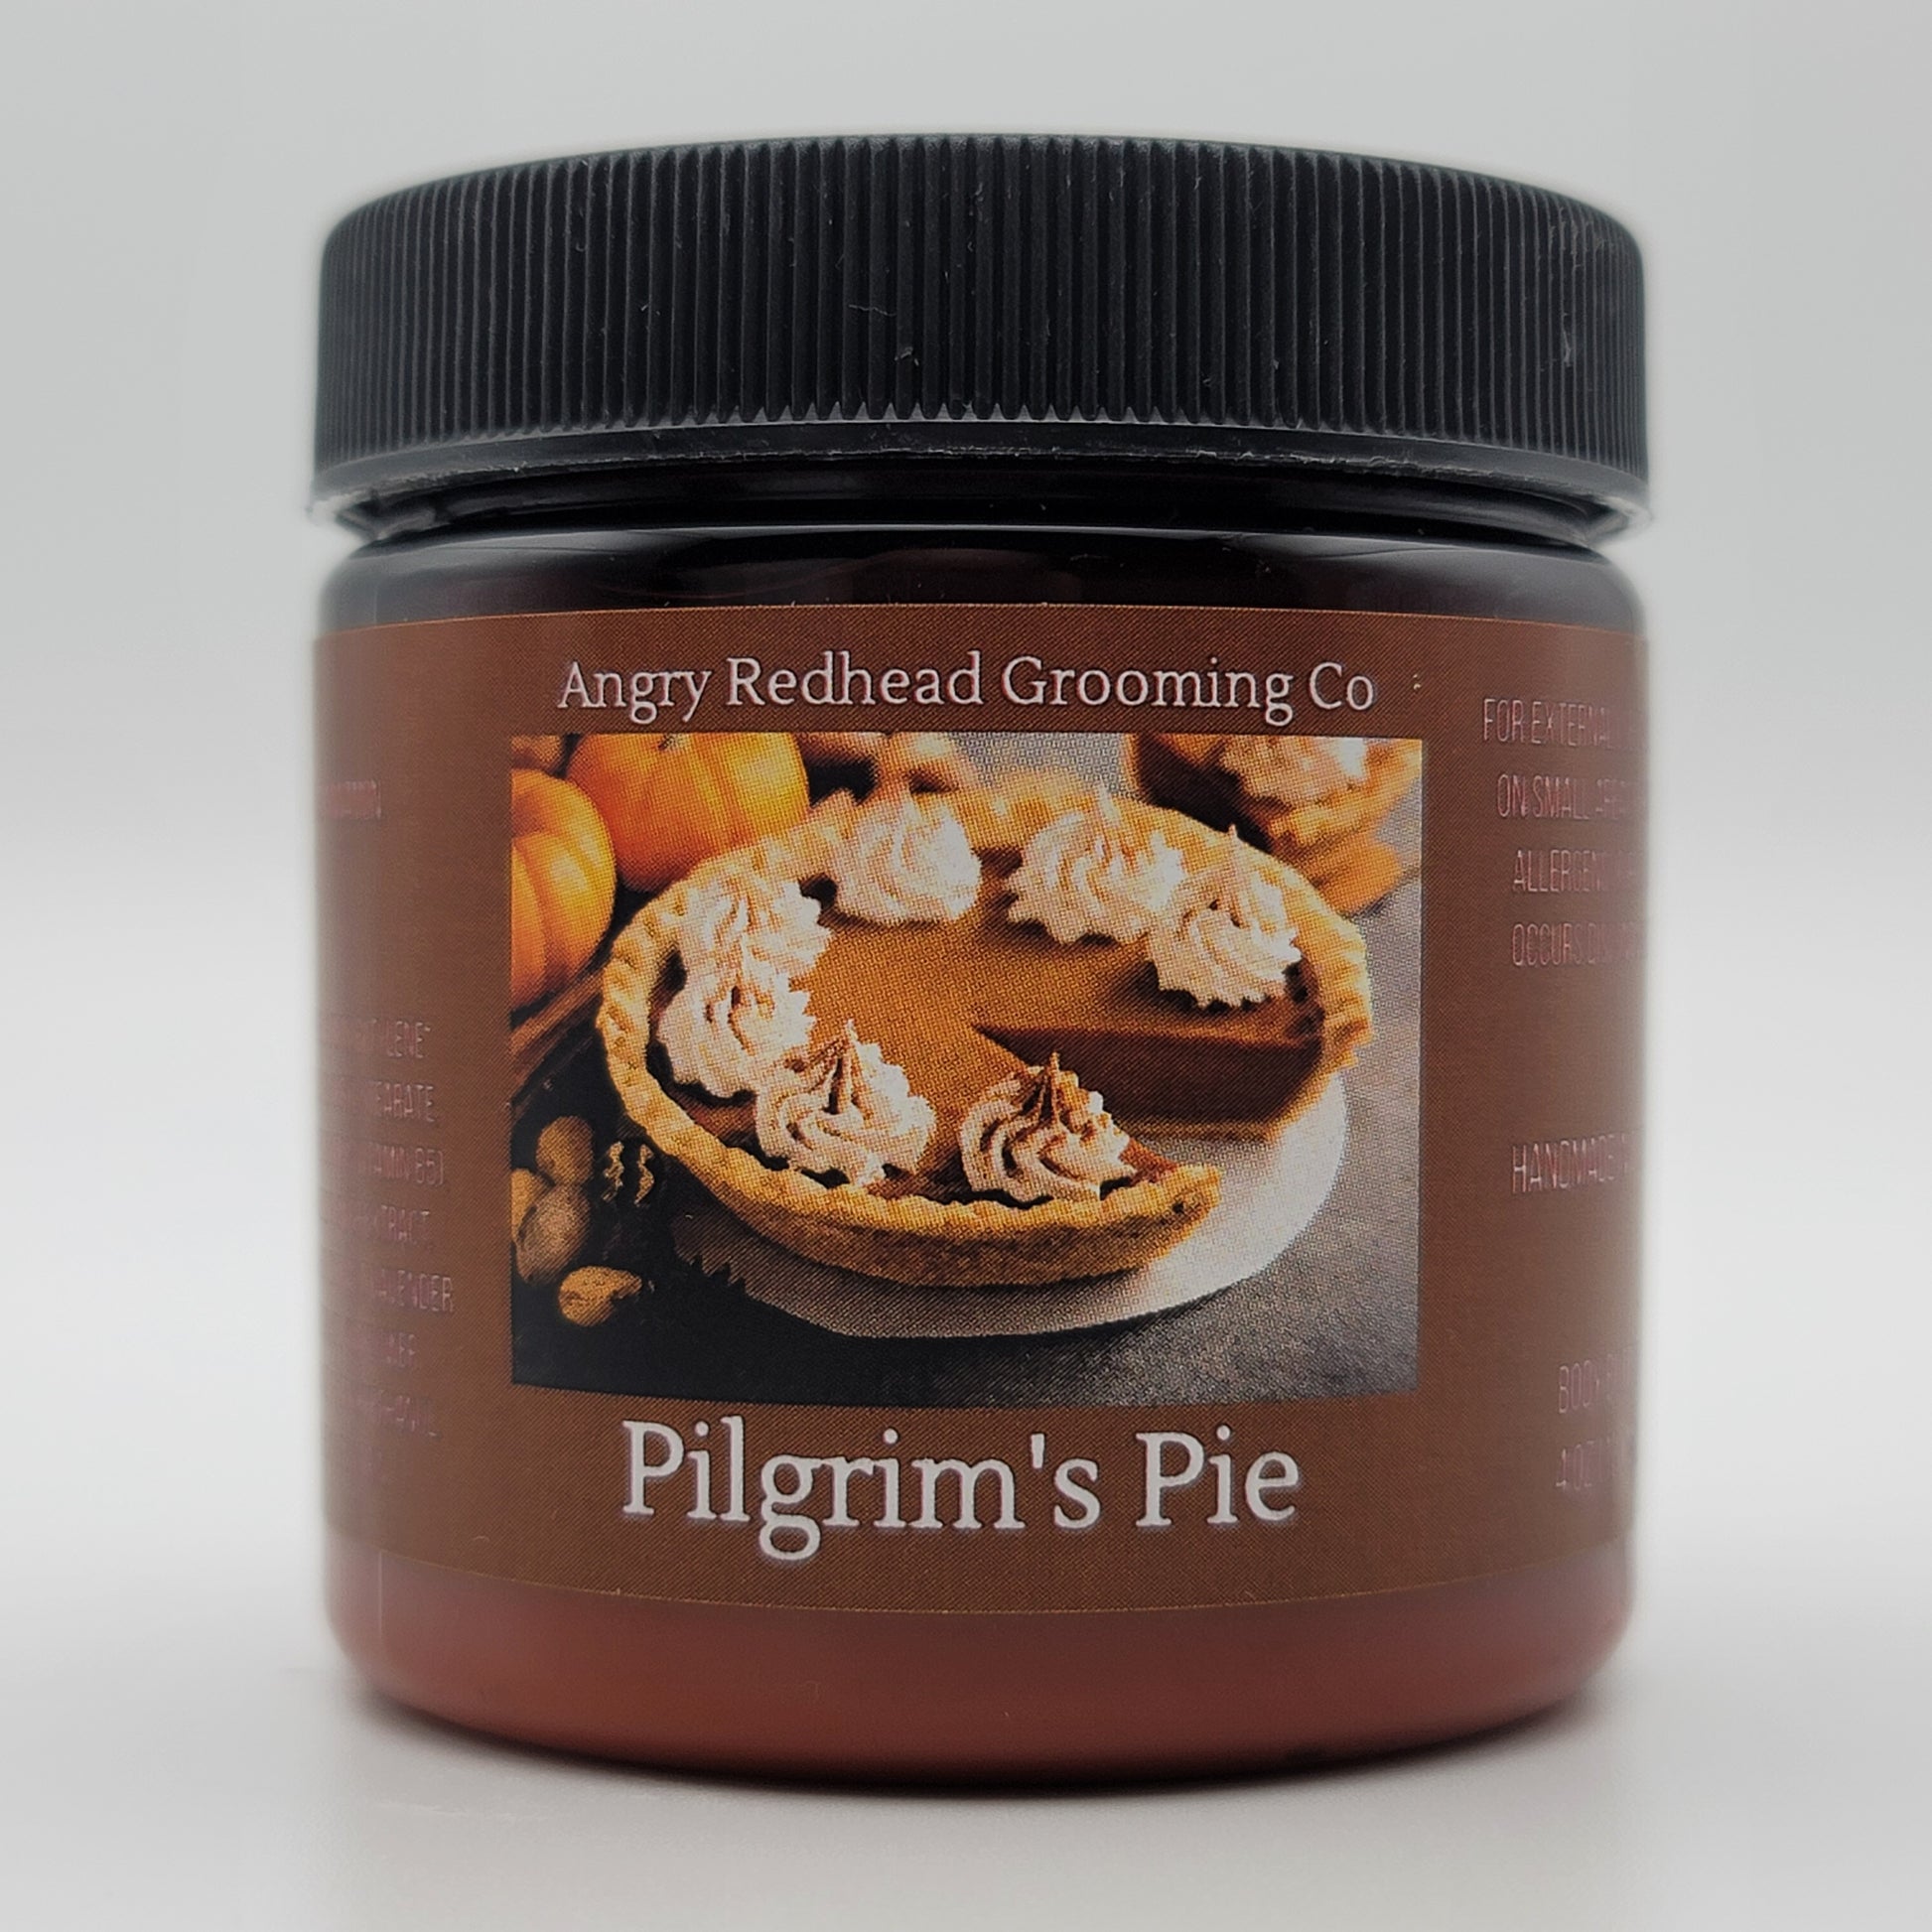 Pilgrim's Pie Body Butter by Angry Redhead Grooming Co - angryredheadgrooming.com